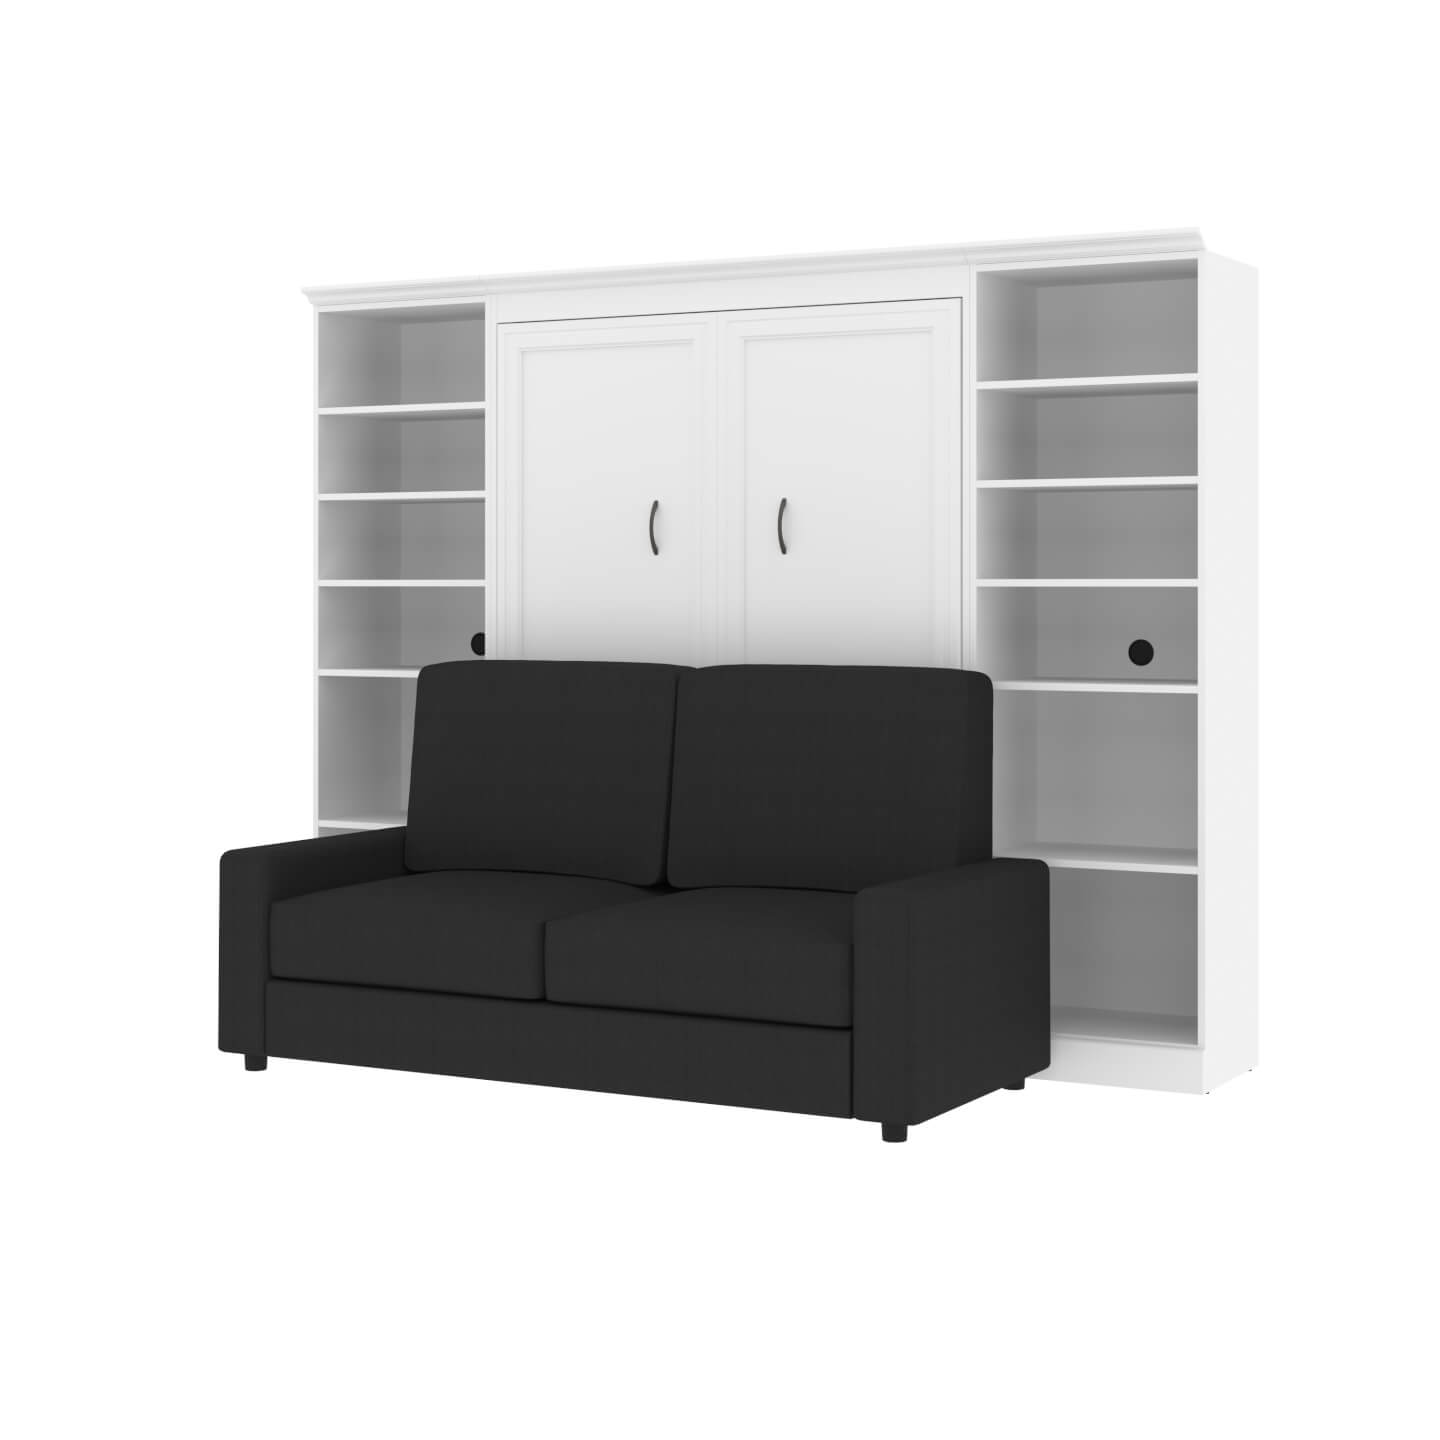 Full Murphy Bed with Sofa and Shelving Units (109W)